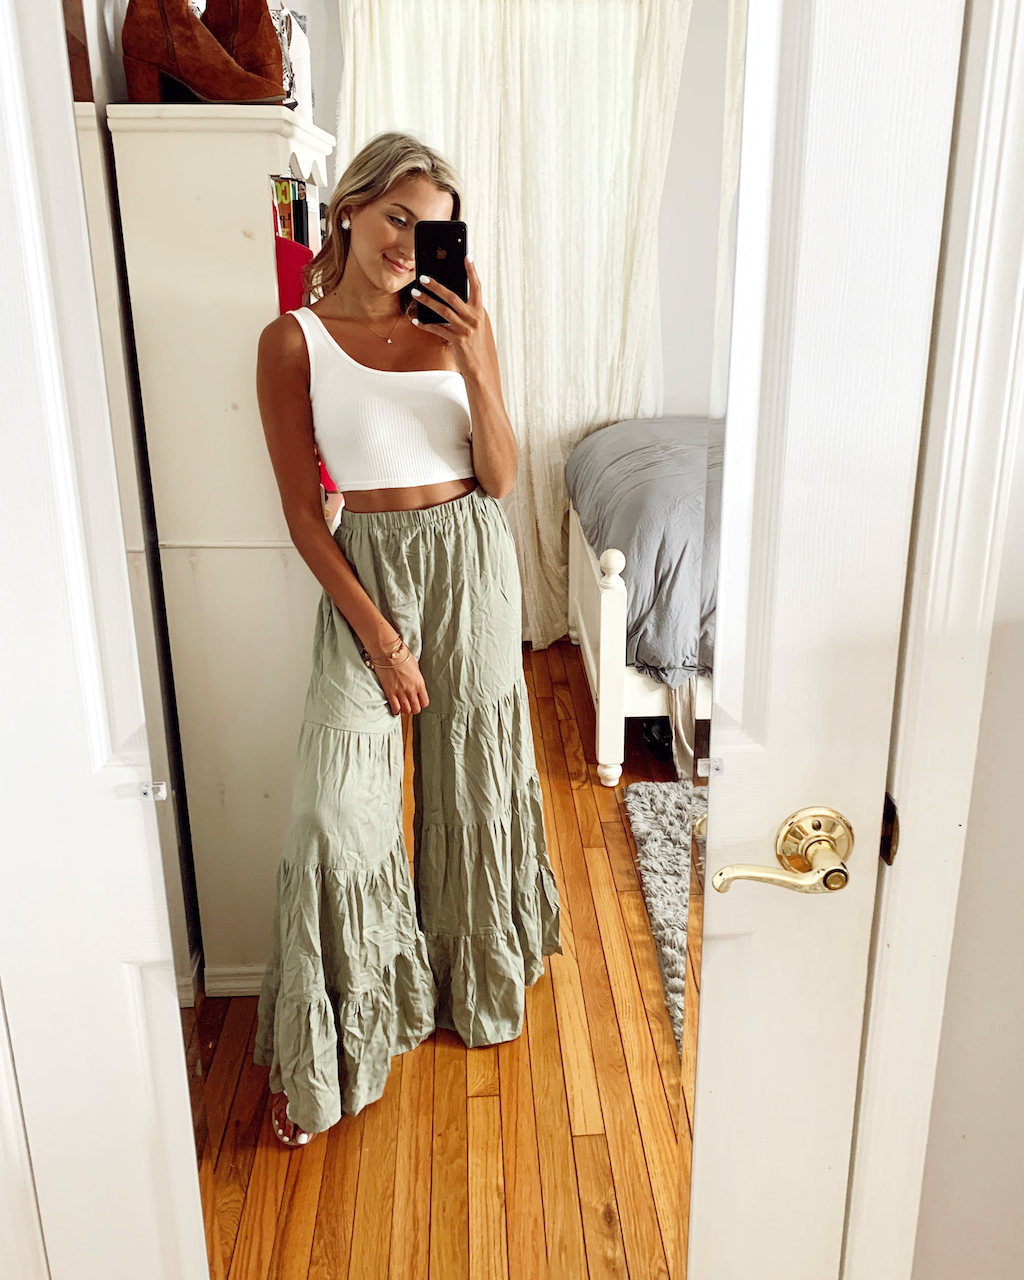 16 Date Night Outfit Ideas For The Summer – Styled by McKenz